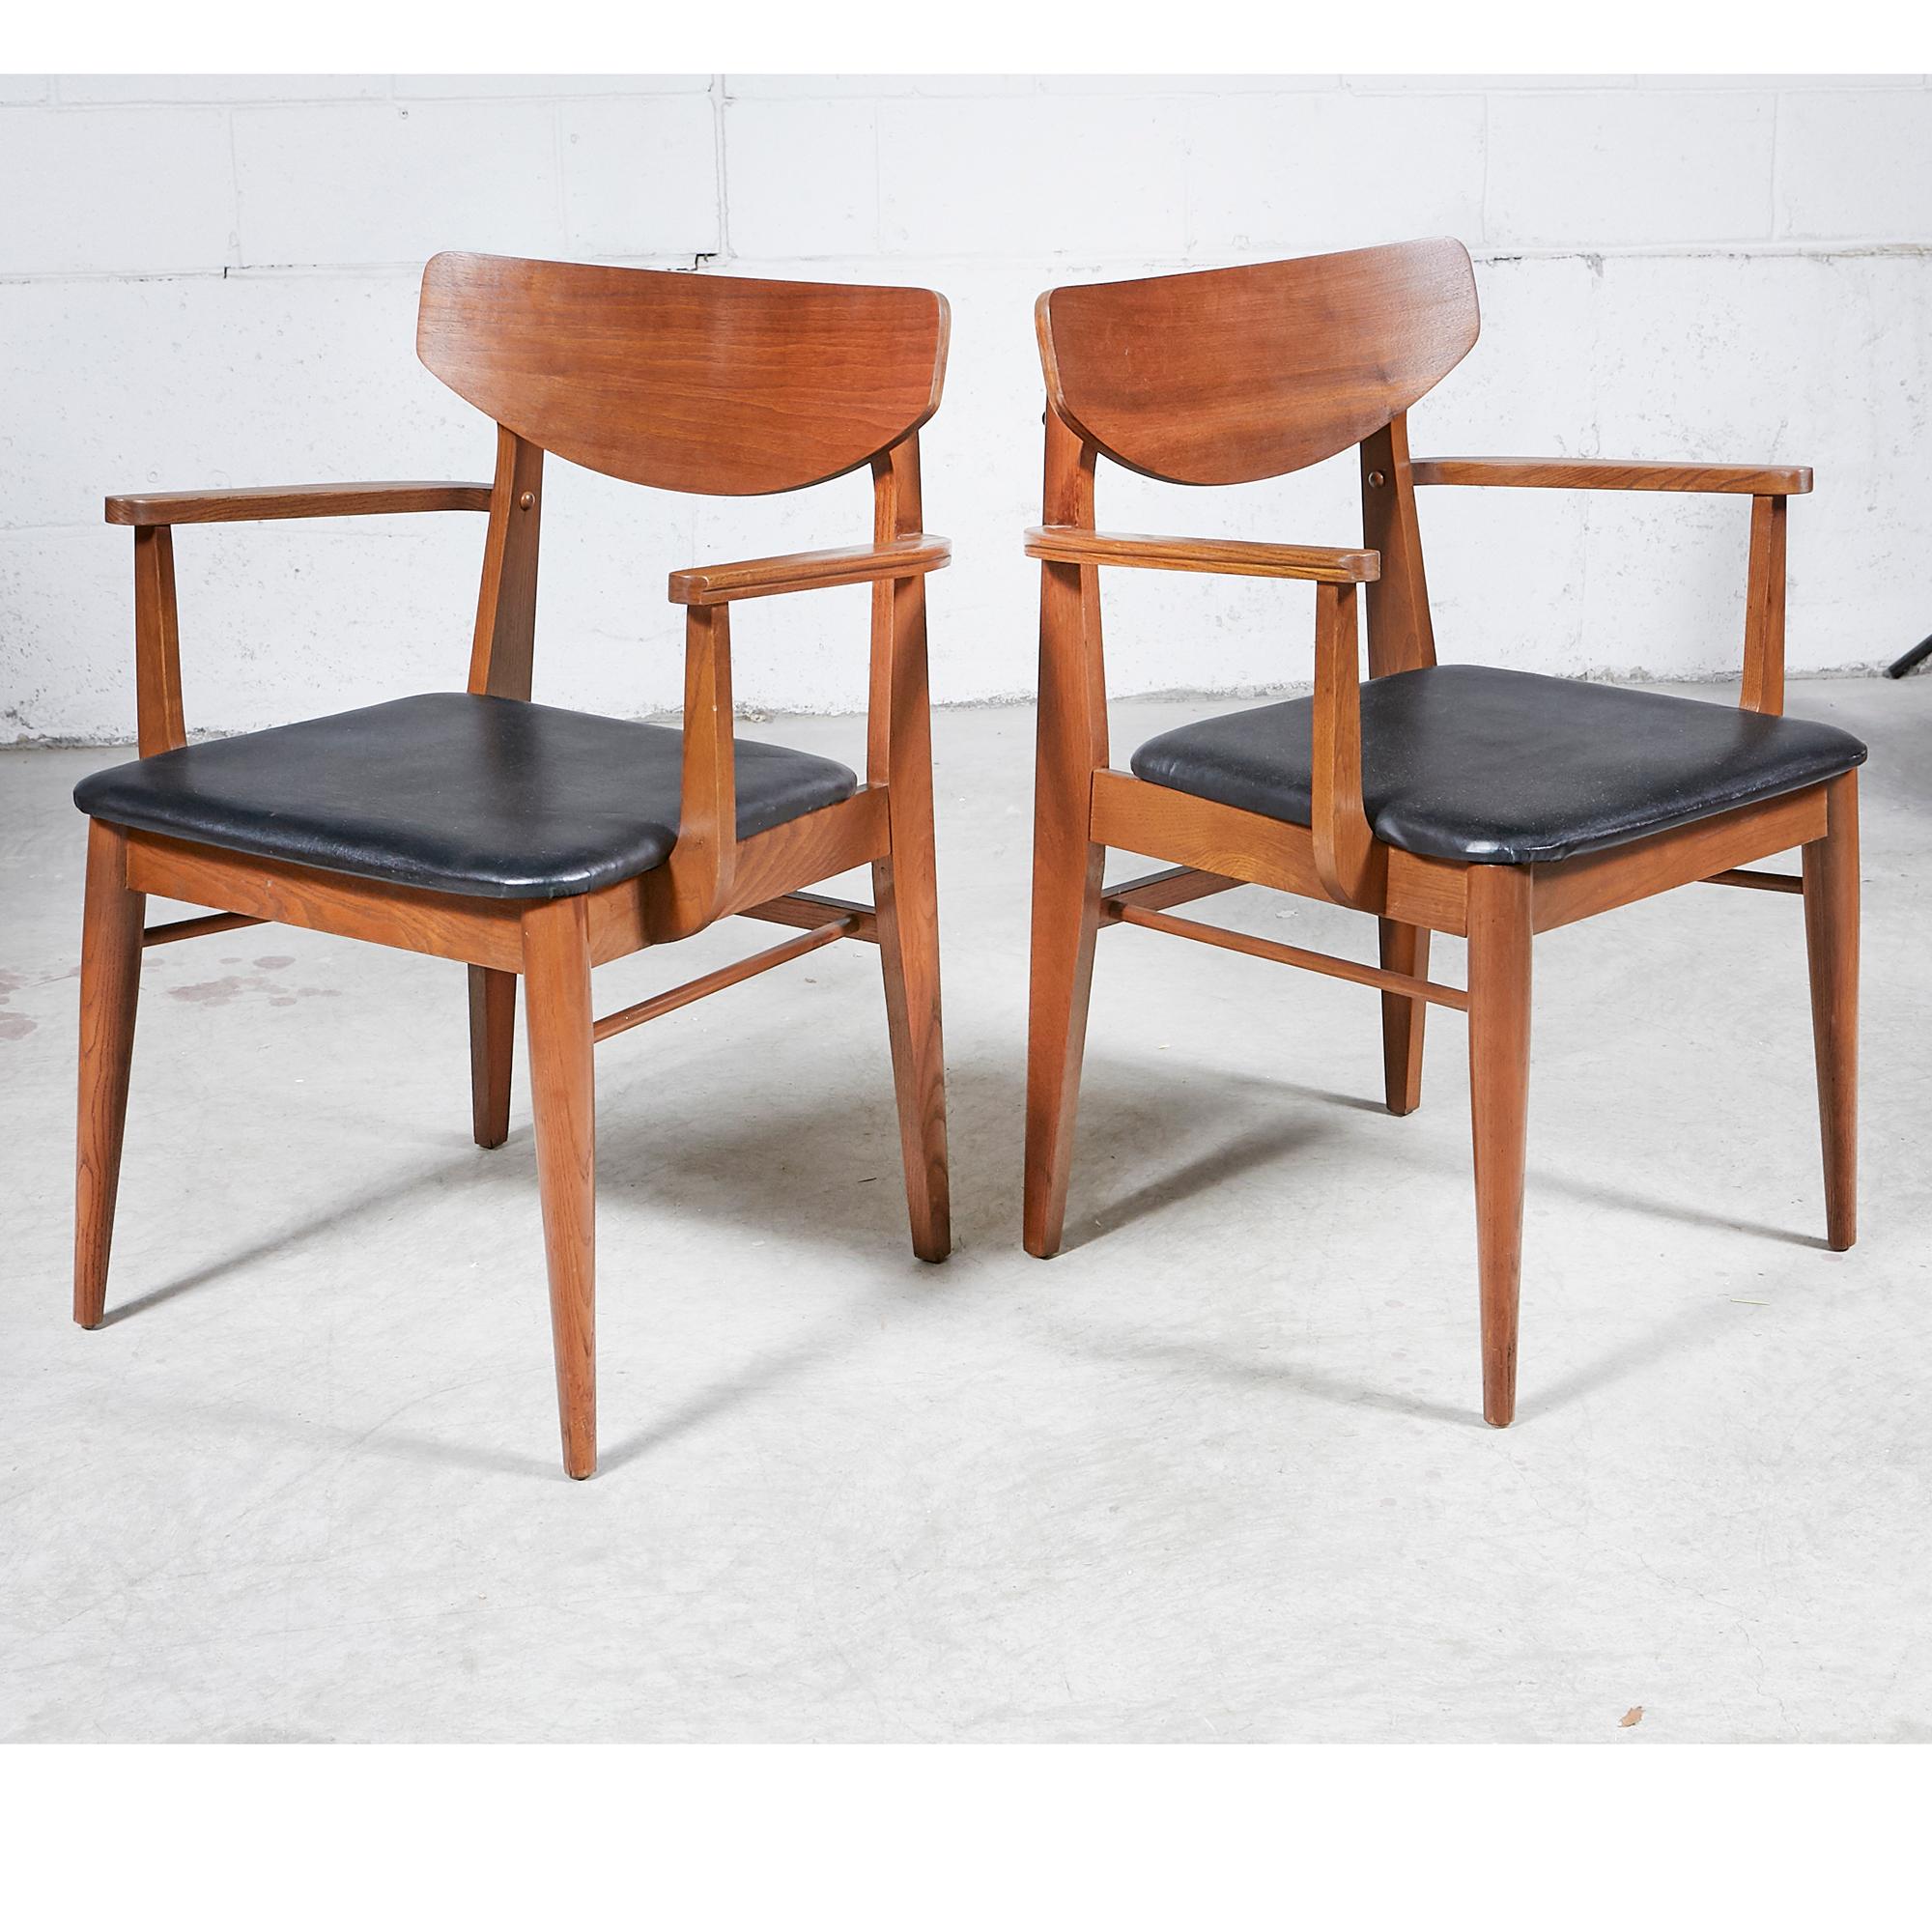 1960s Stanley Furniture Dining Chairs By Paul Browning Set Of 6 For Sale At 1stdibs